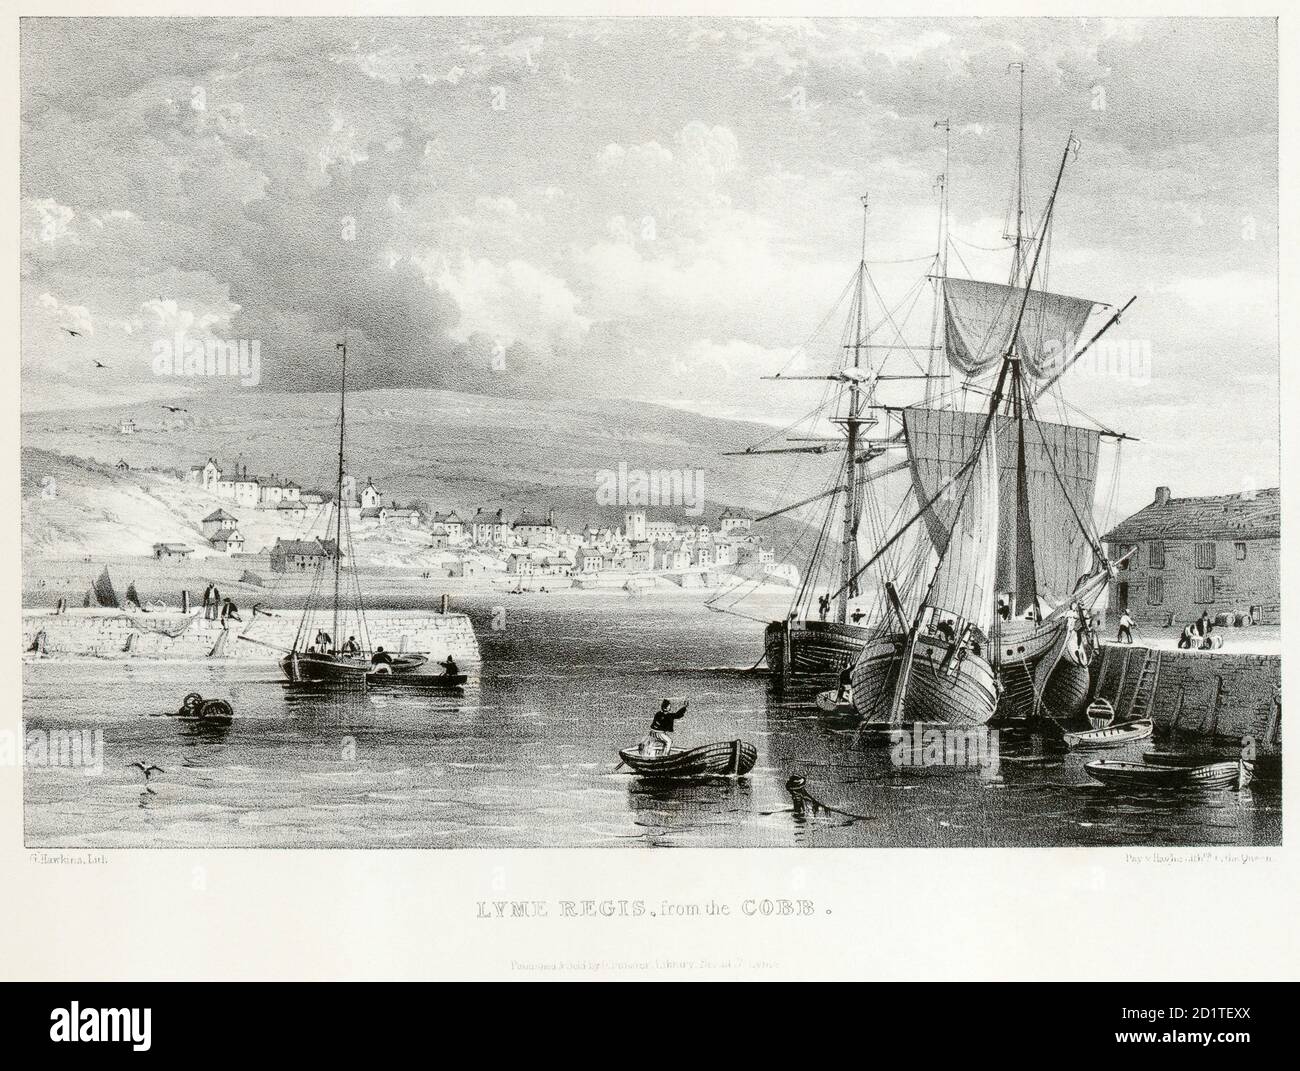 MAYSON BEETON COLLECTION. Lyme Regis, Dorset. 'Lyme Regis from the Cobb' showing small boats and fishing vessels with the town beyond. Engraving dated 1835. Stock Photo